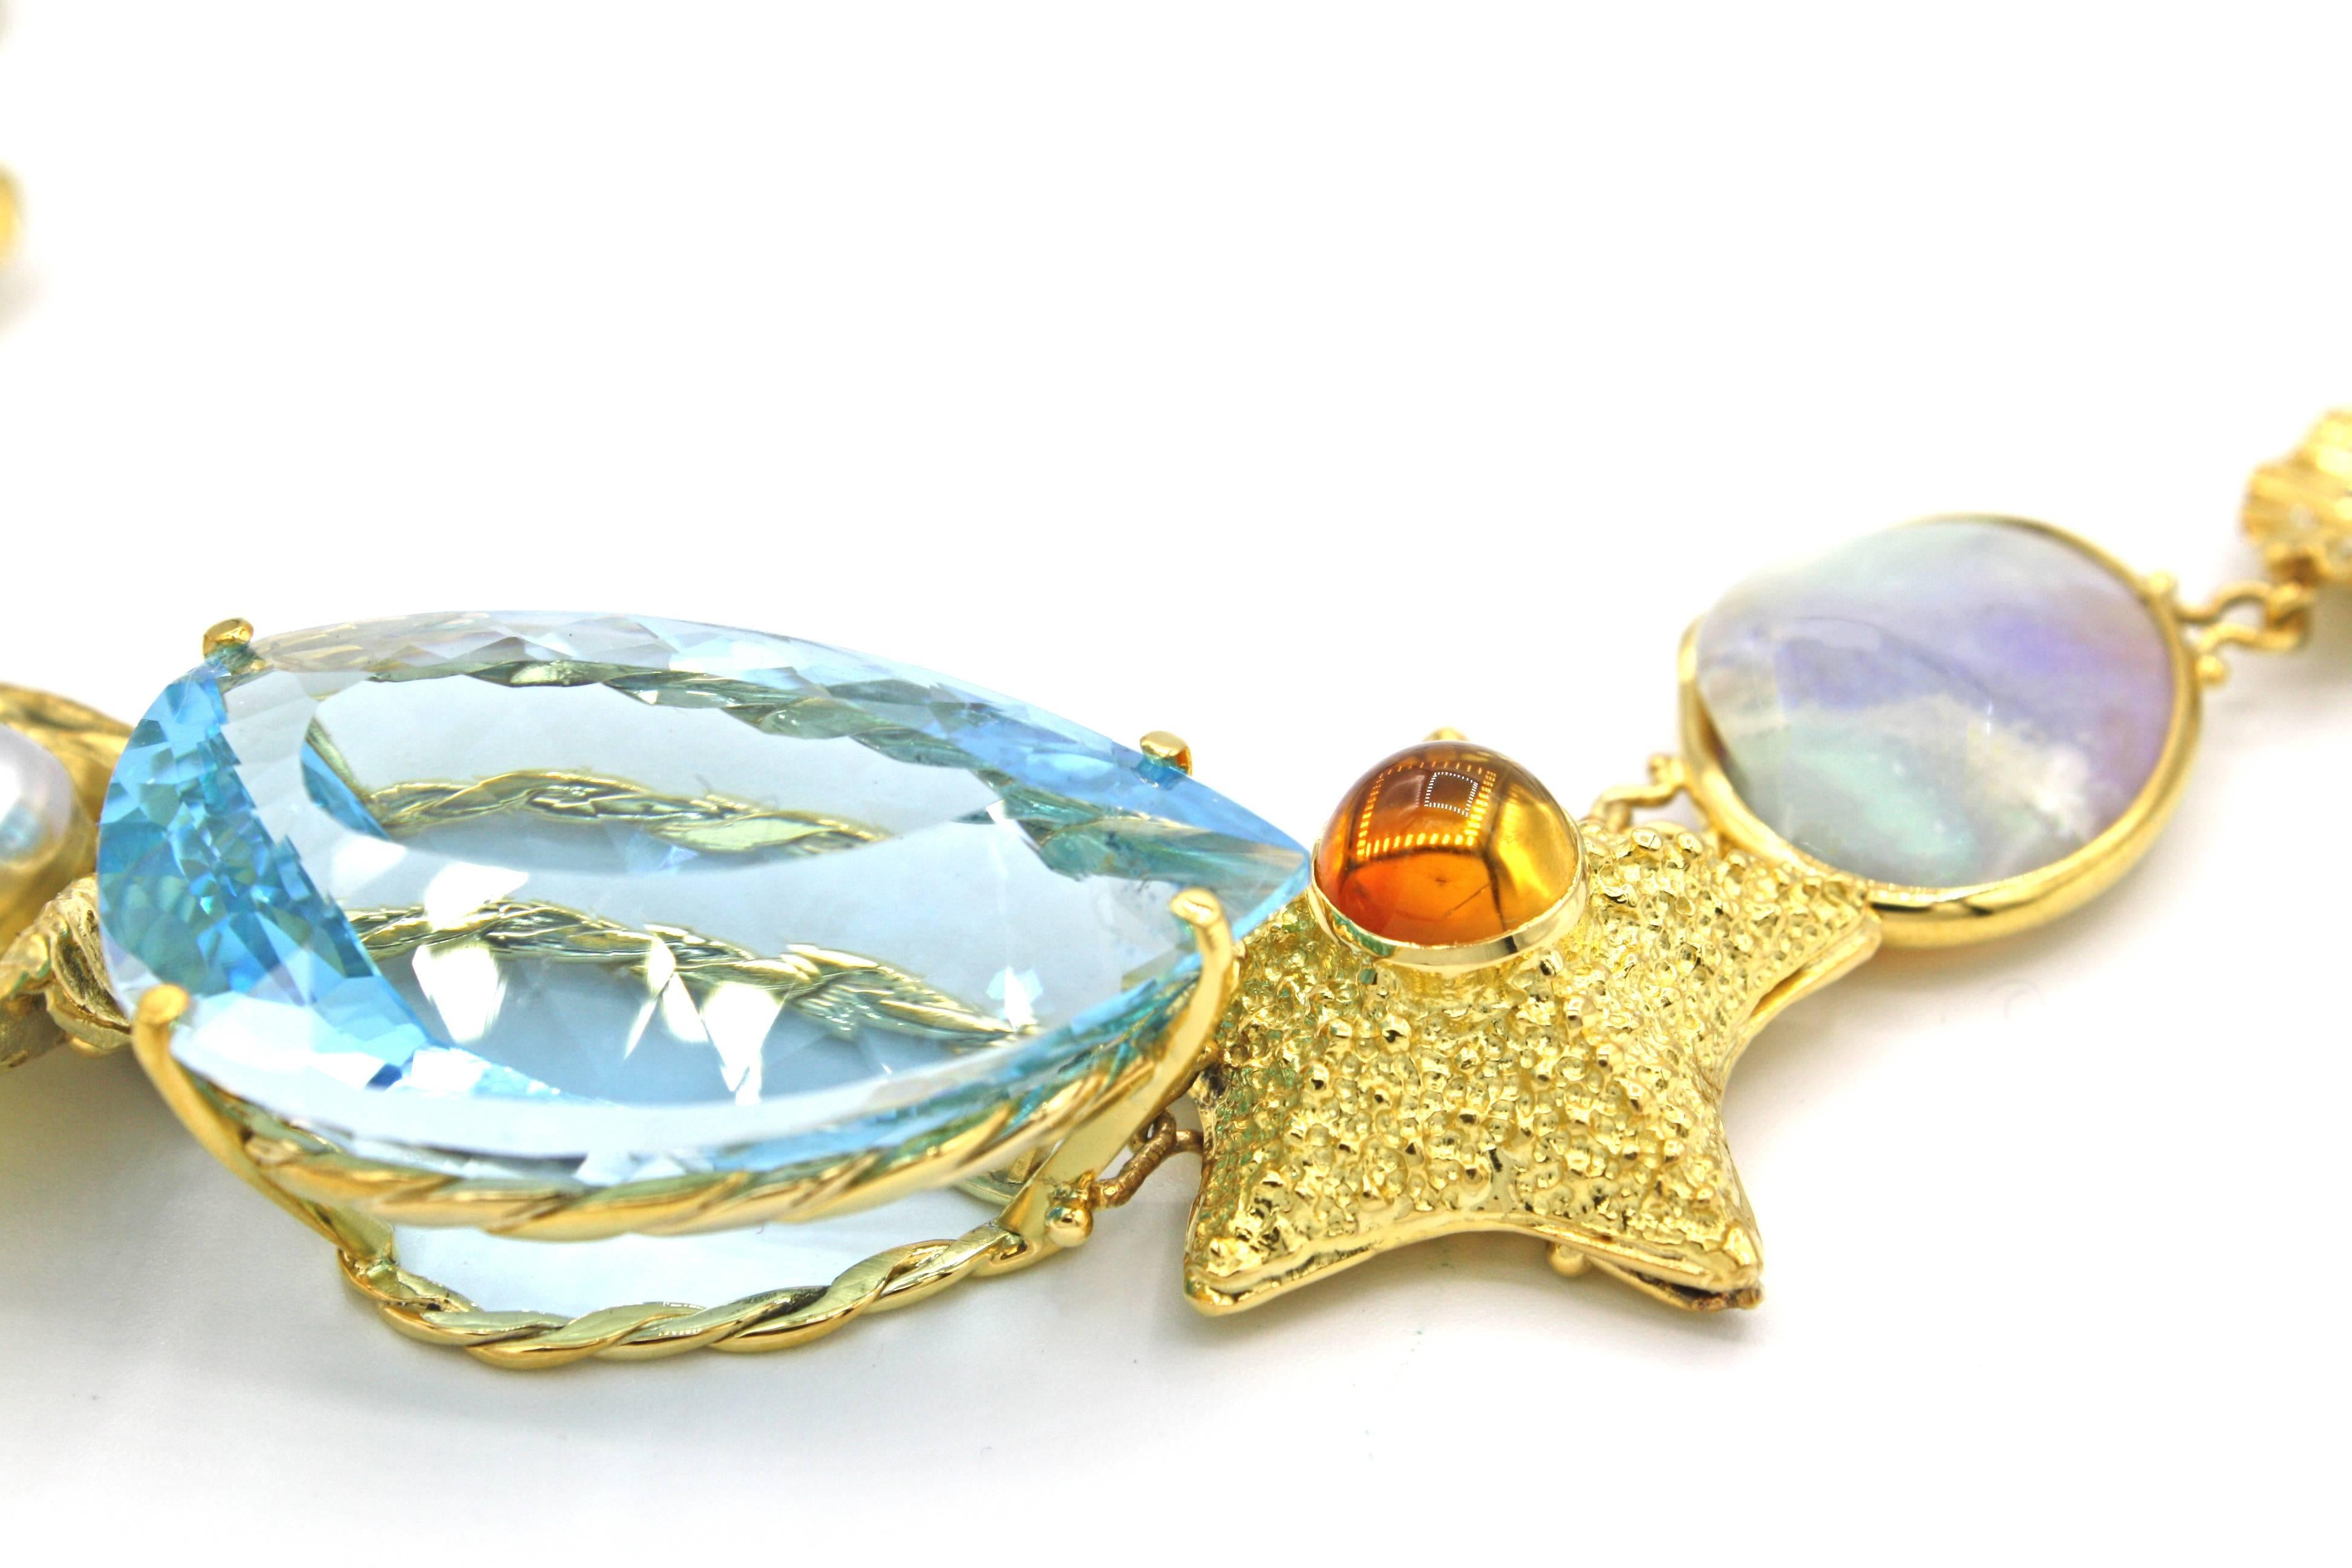 This stunning one-of-a-kind necklace is from Renato Cipullo's Return to the Sea Collection.  Featuring a center 75ct blue topaz accompanied by a variety of 18k yellow gold sea motifs including a turtle with emerald eyes and citrine shell, crab with